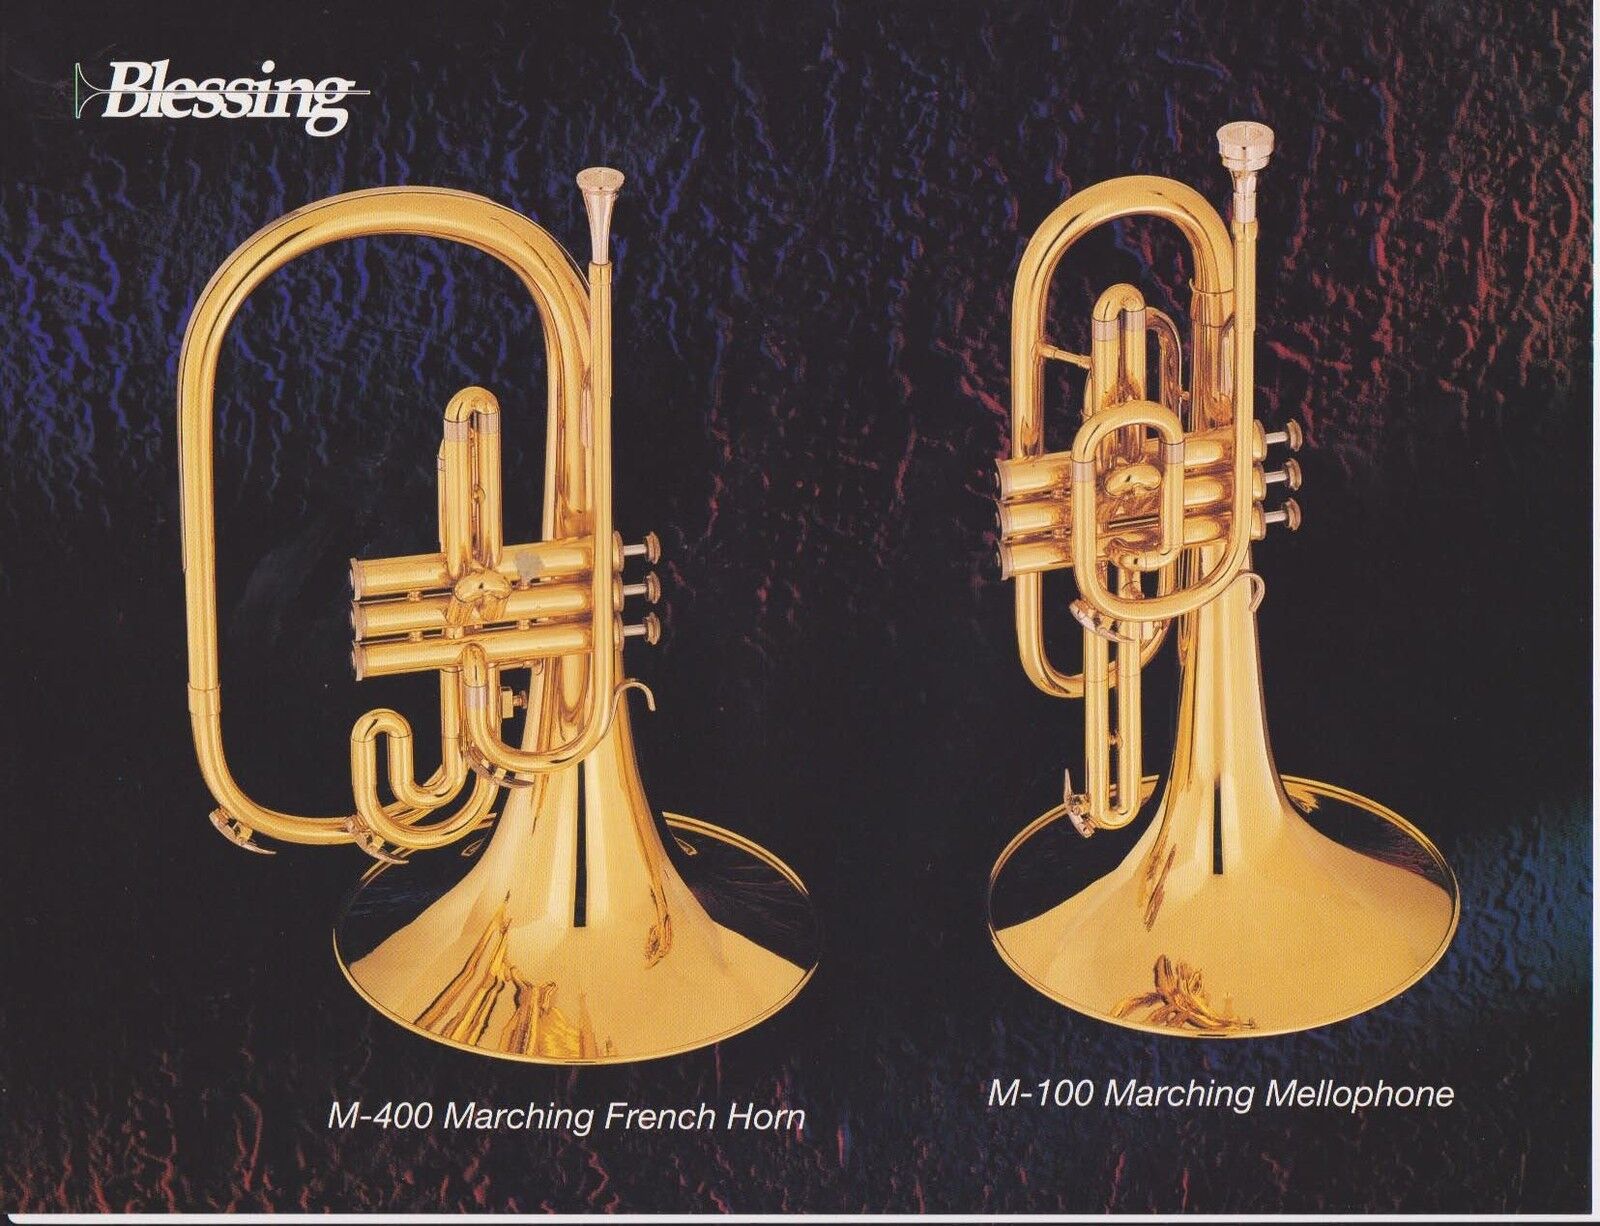 mellophone vs marching french horn